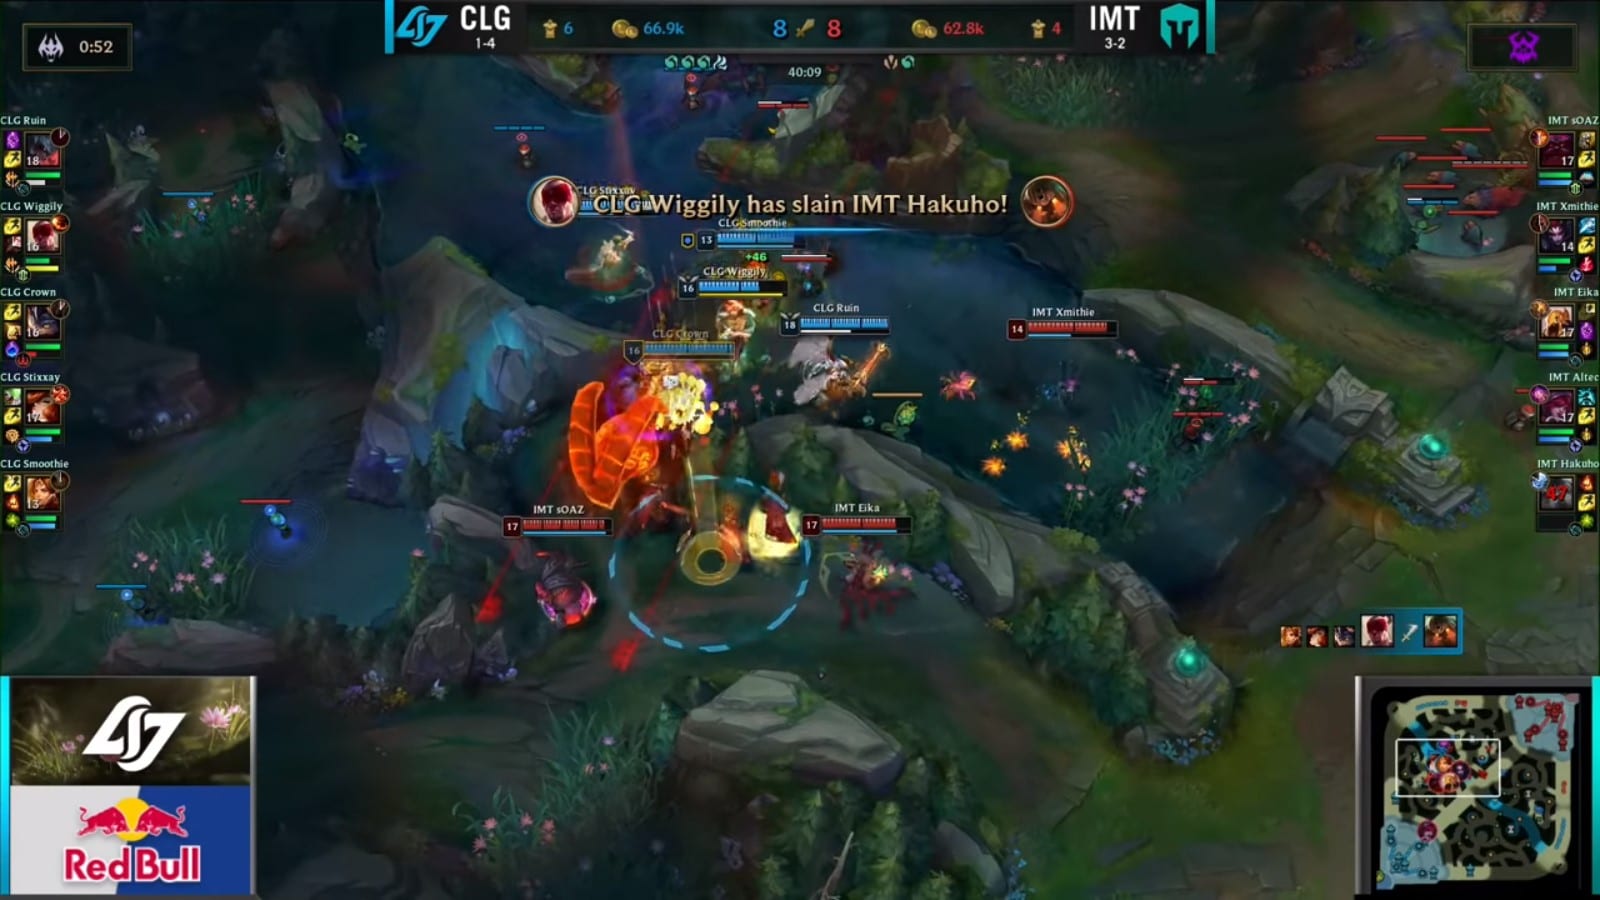 Altec pushes mid, while CLG fights IMT at Baron. 